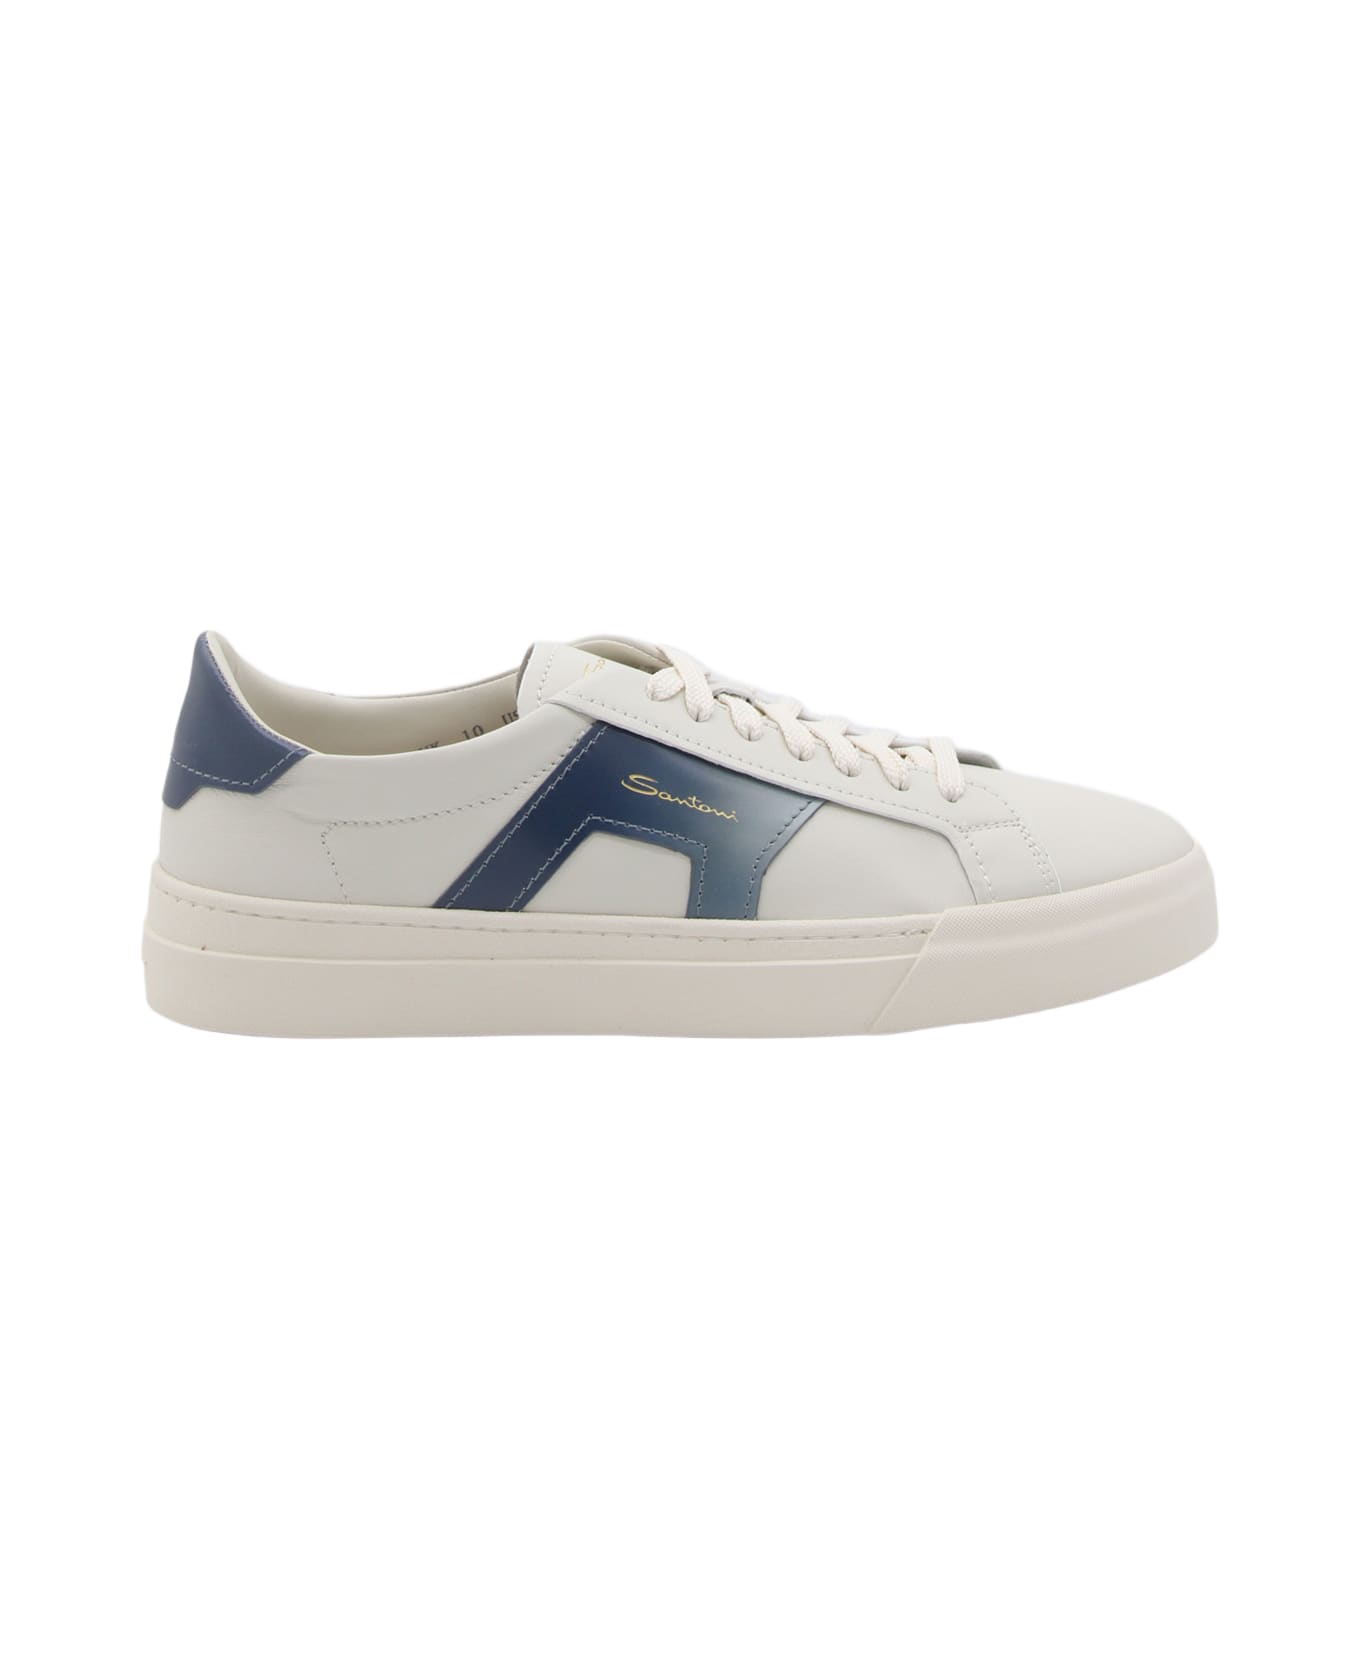 Santoni White And Blue Leather Buckle Sneakers - White